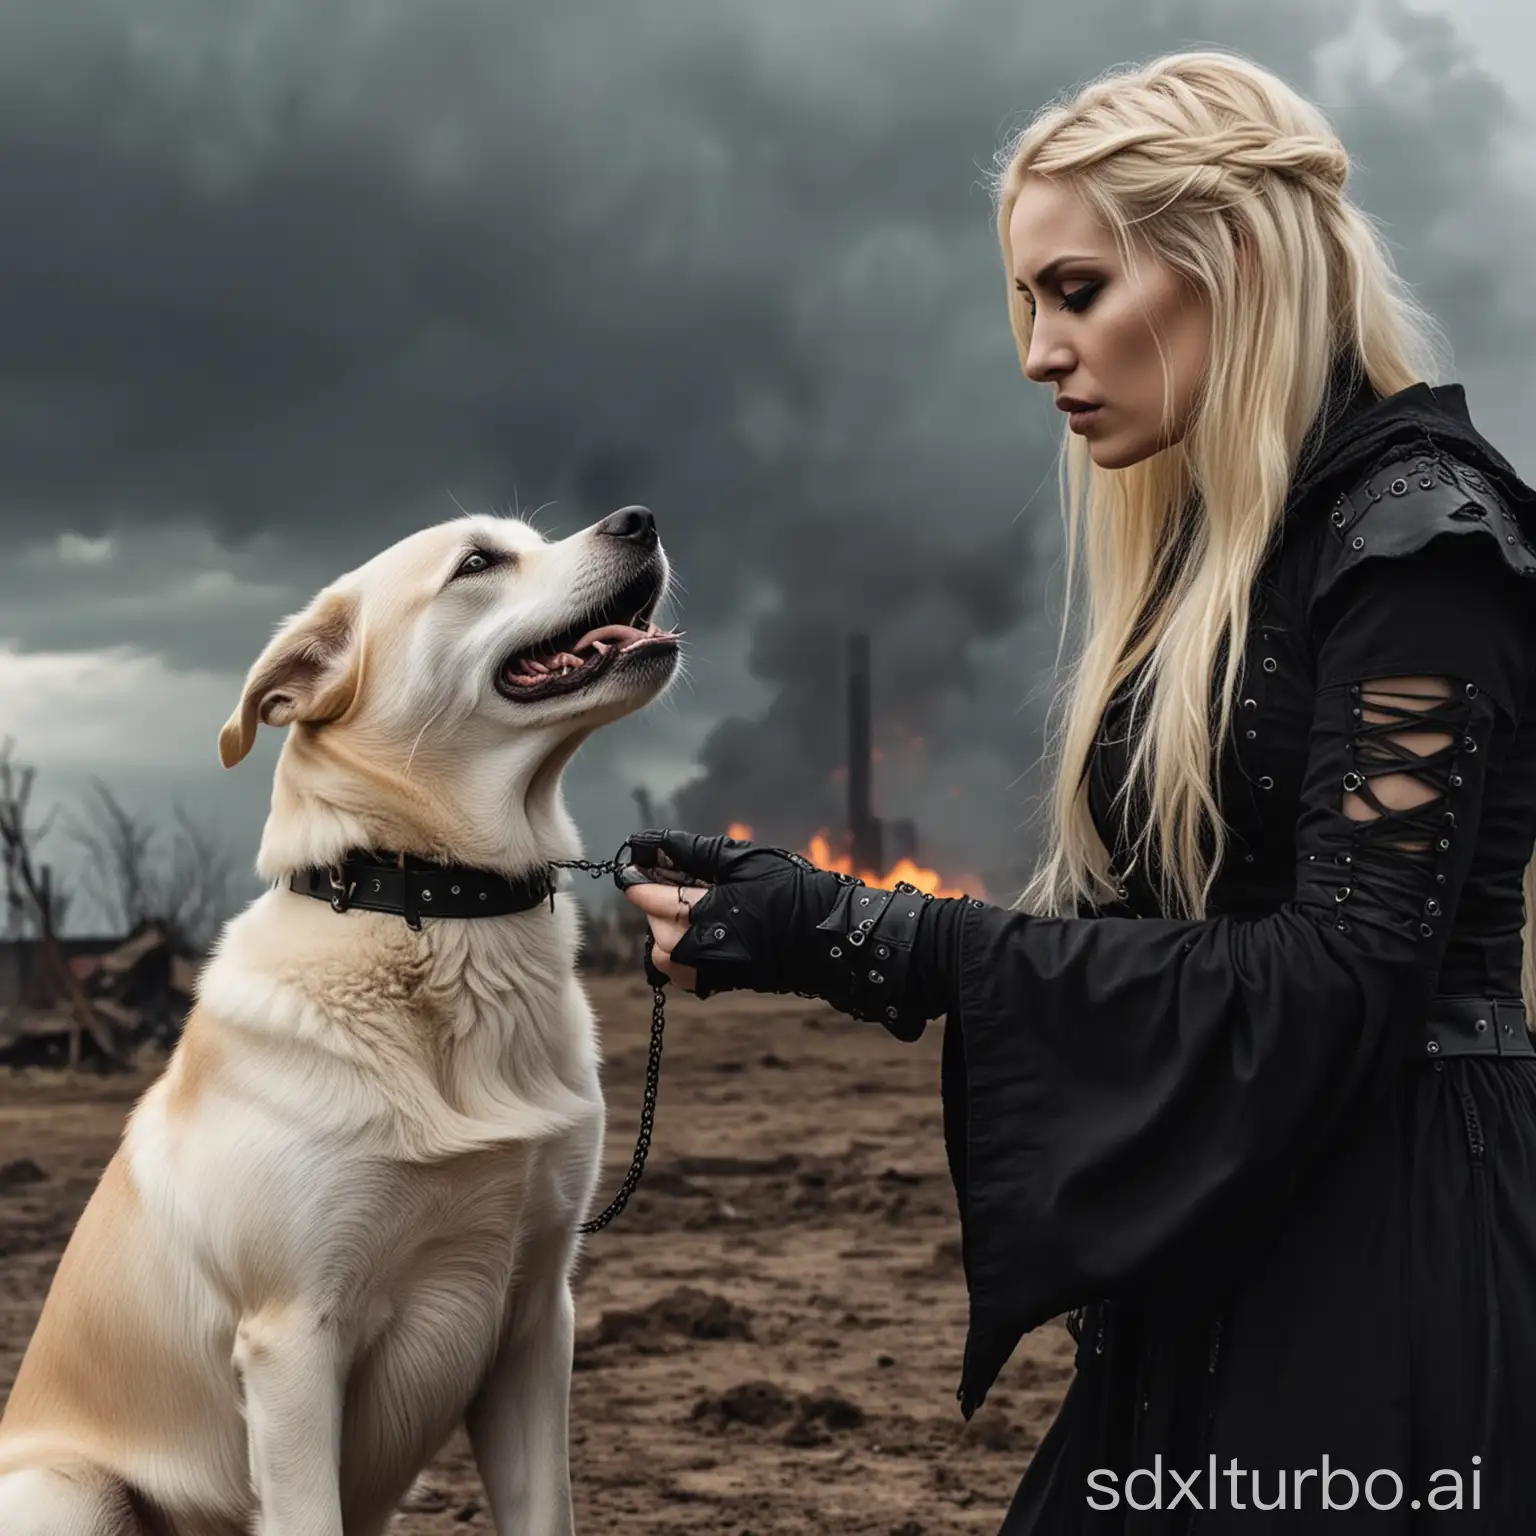 Blonde-Gothic-Woman-Contemplates-Apocalypse-with-Her-Faithful-Dog